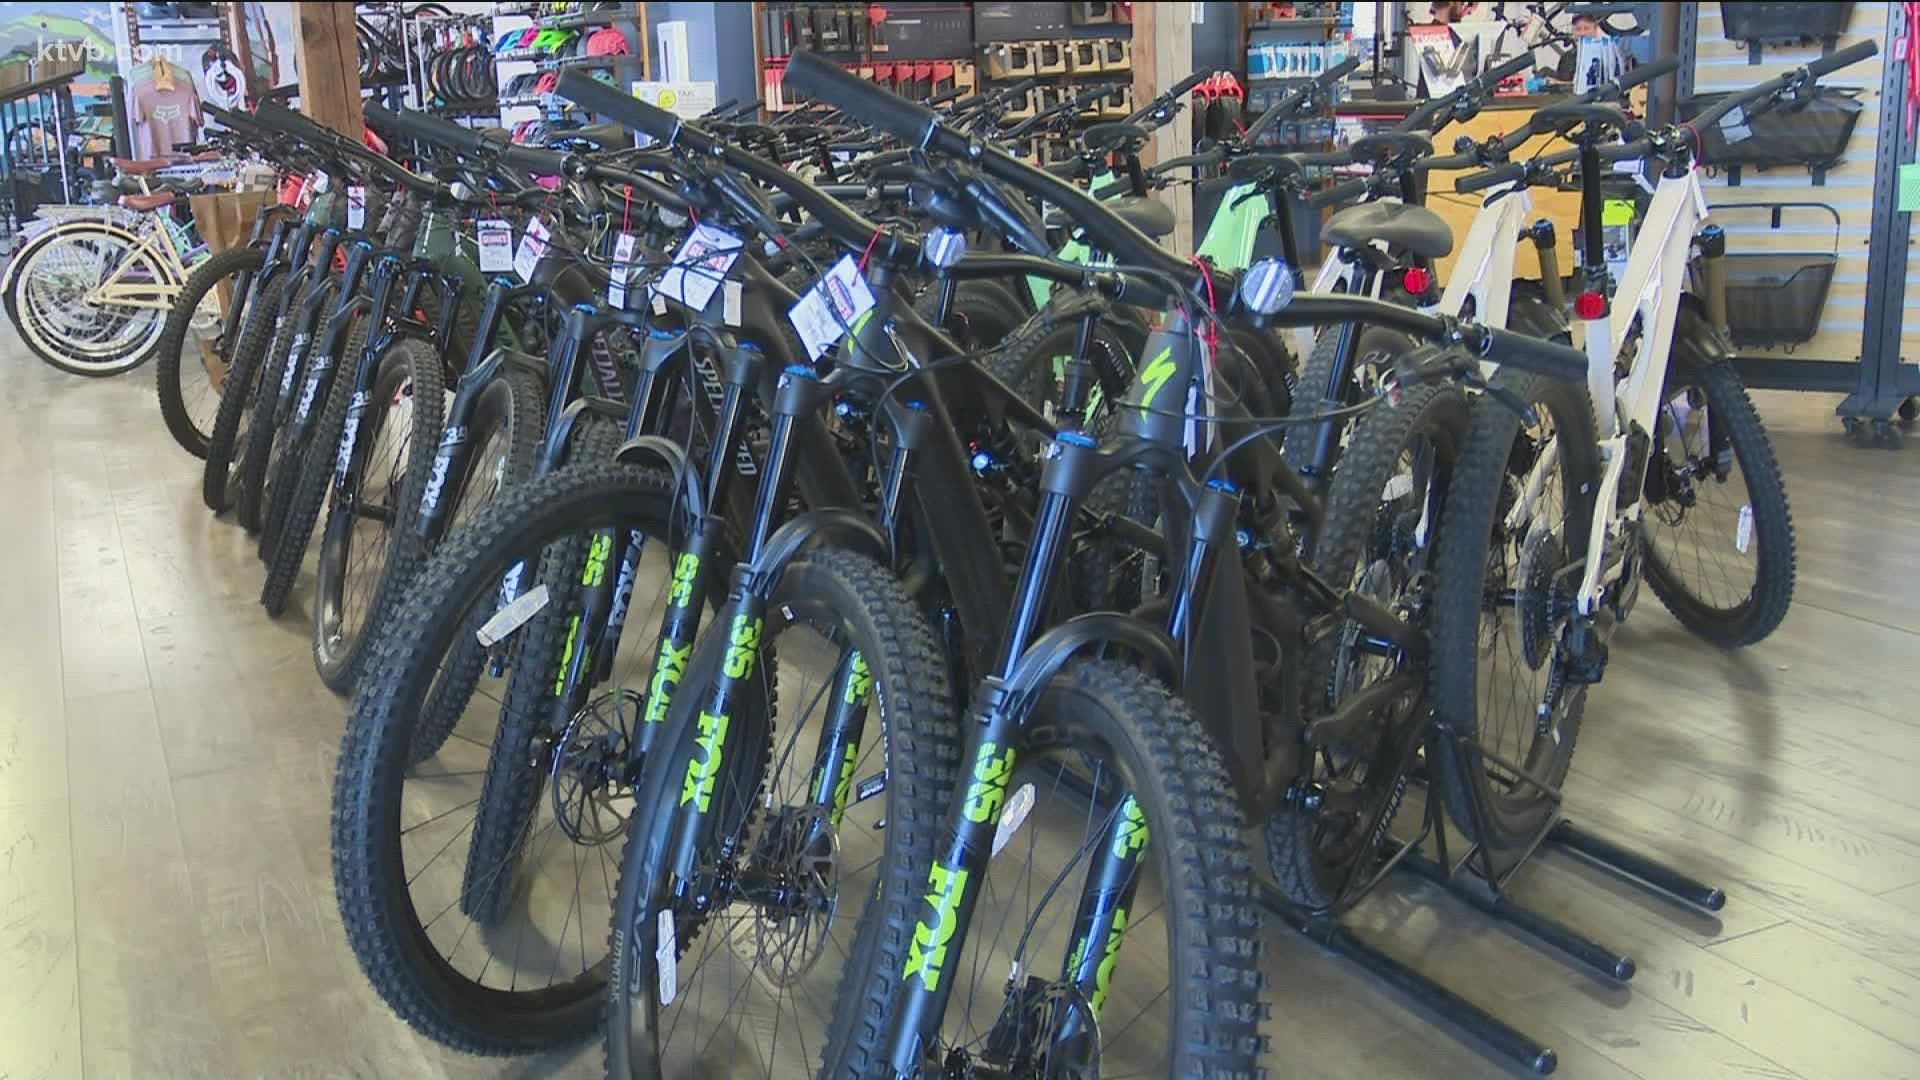 Bike shop owners around Boise said they are seeing more business lately as temperatures start to warm up and the cost to fill up at the pump goes up.